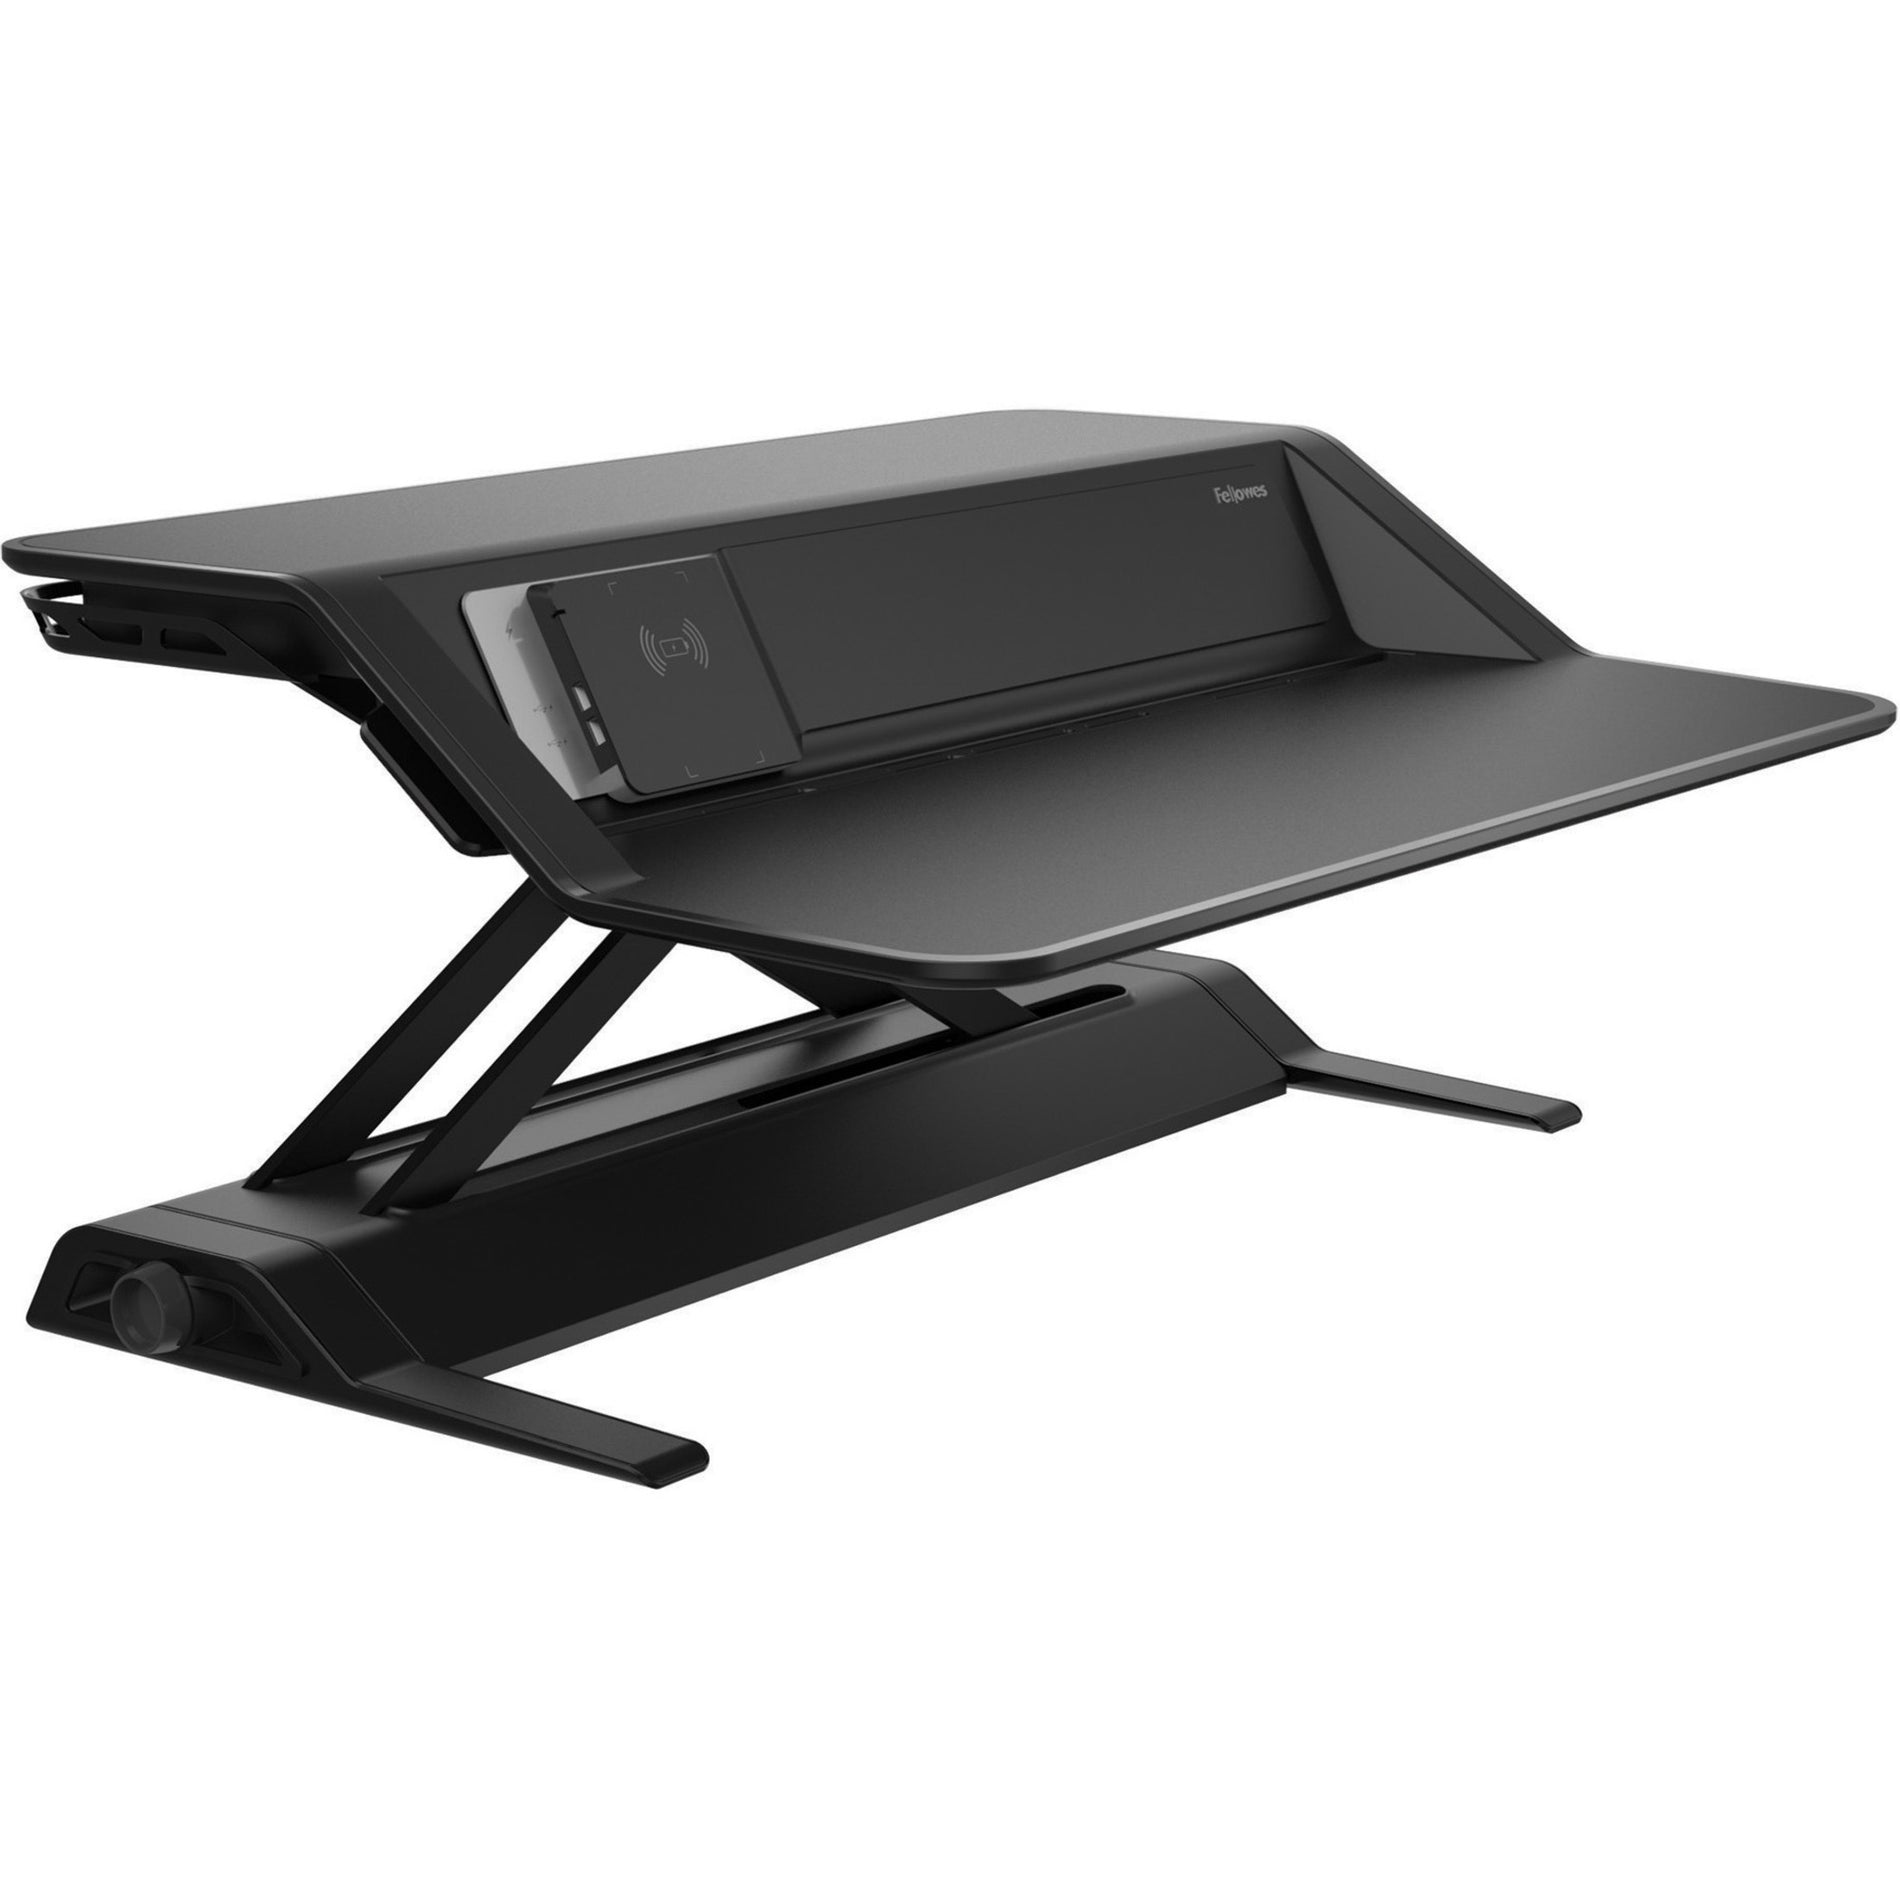 Fellowes 8080301 Lotus DX Sit-Stand Workstation, Black - Antimicrobial, Charge Function, Built-in USB Port